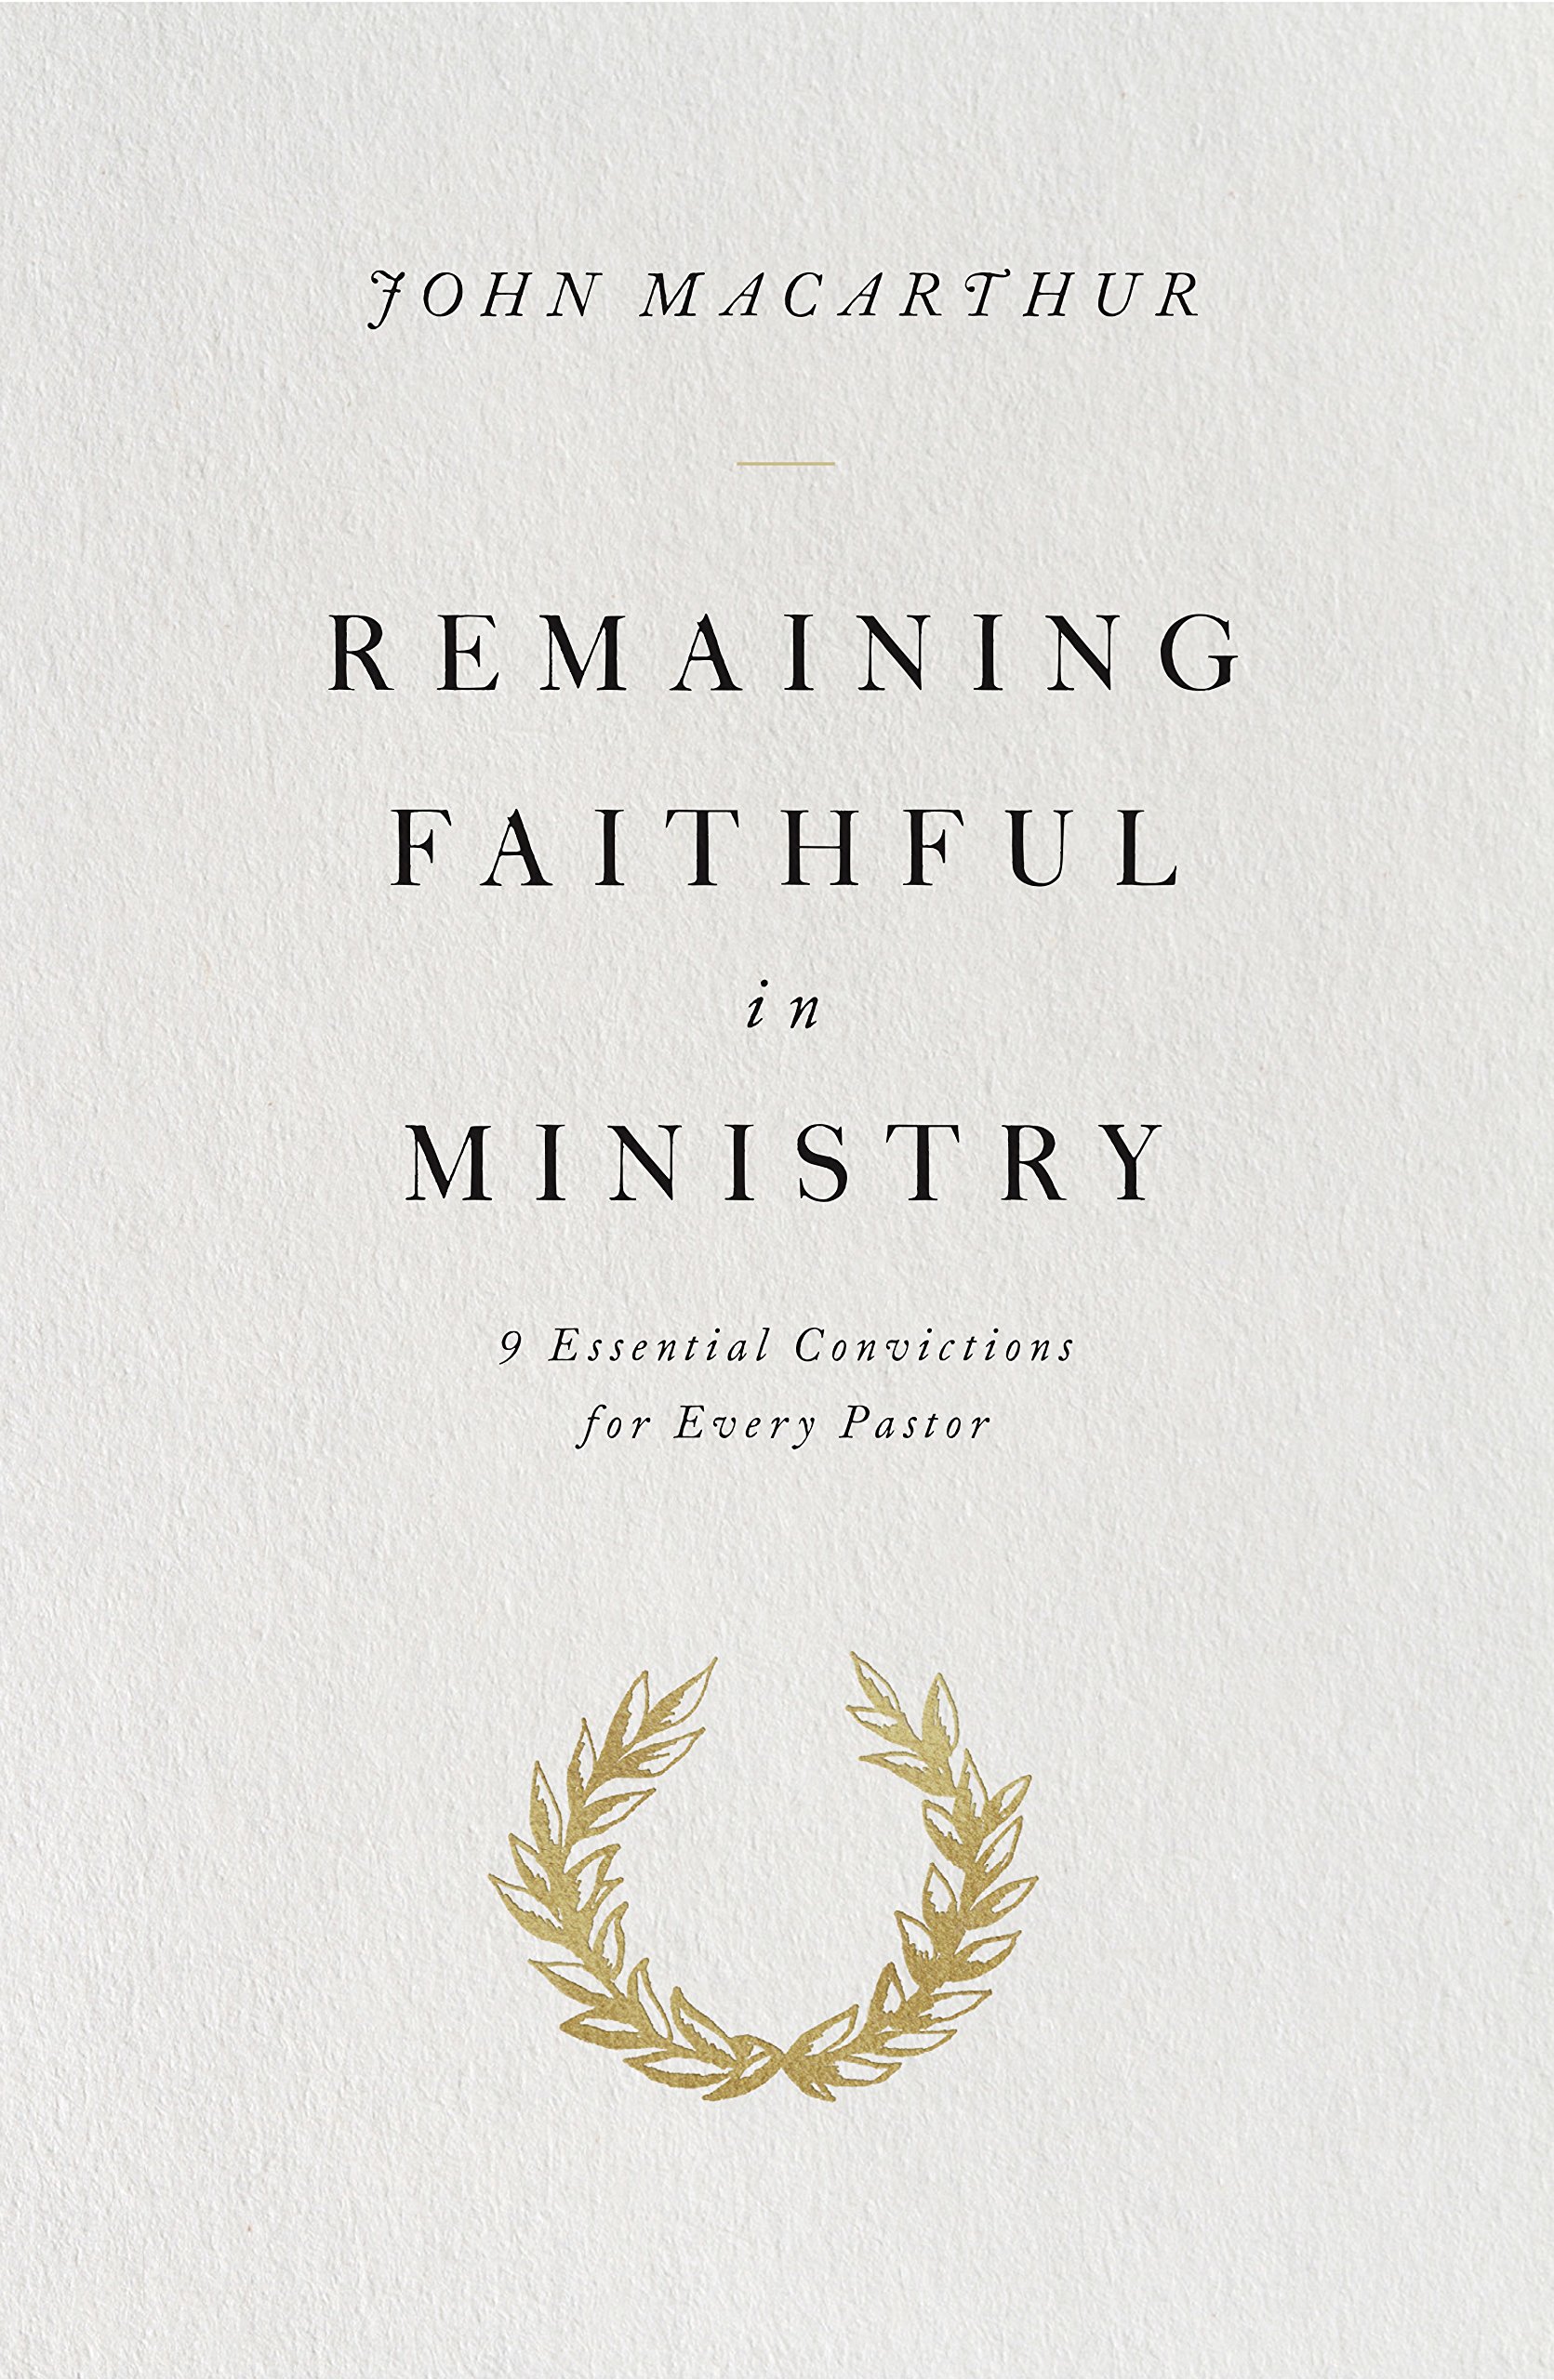 Book Notice: REMAINING FAITHFUL IN MINISTRY: 9 ESSENTIAL CONVICTIONS FOR EVERY PASTOR, by John MacArthur